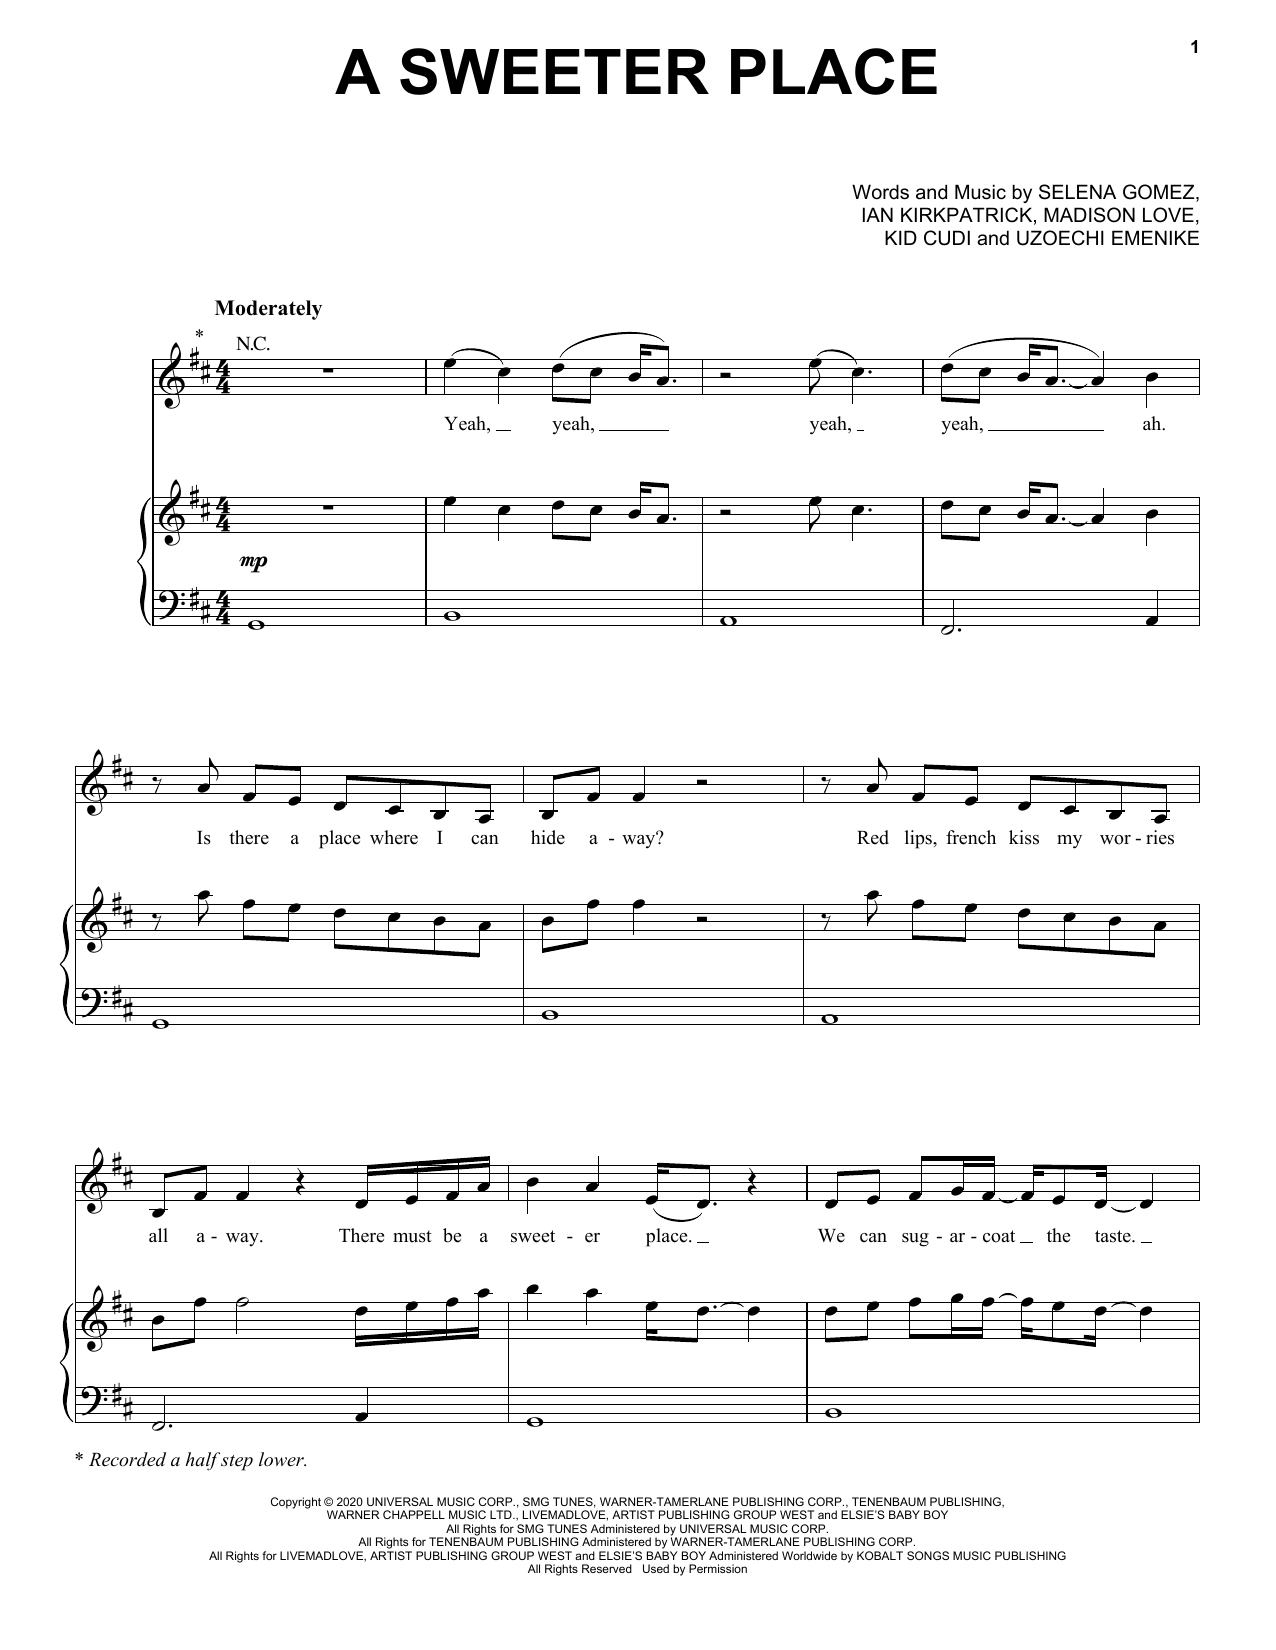 Download Selena Gomez A Sweeter Place (feat. Kid Cudi) Sheet Music